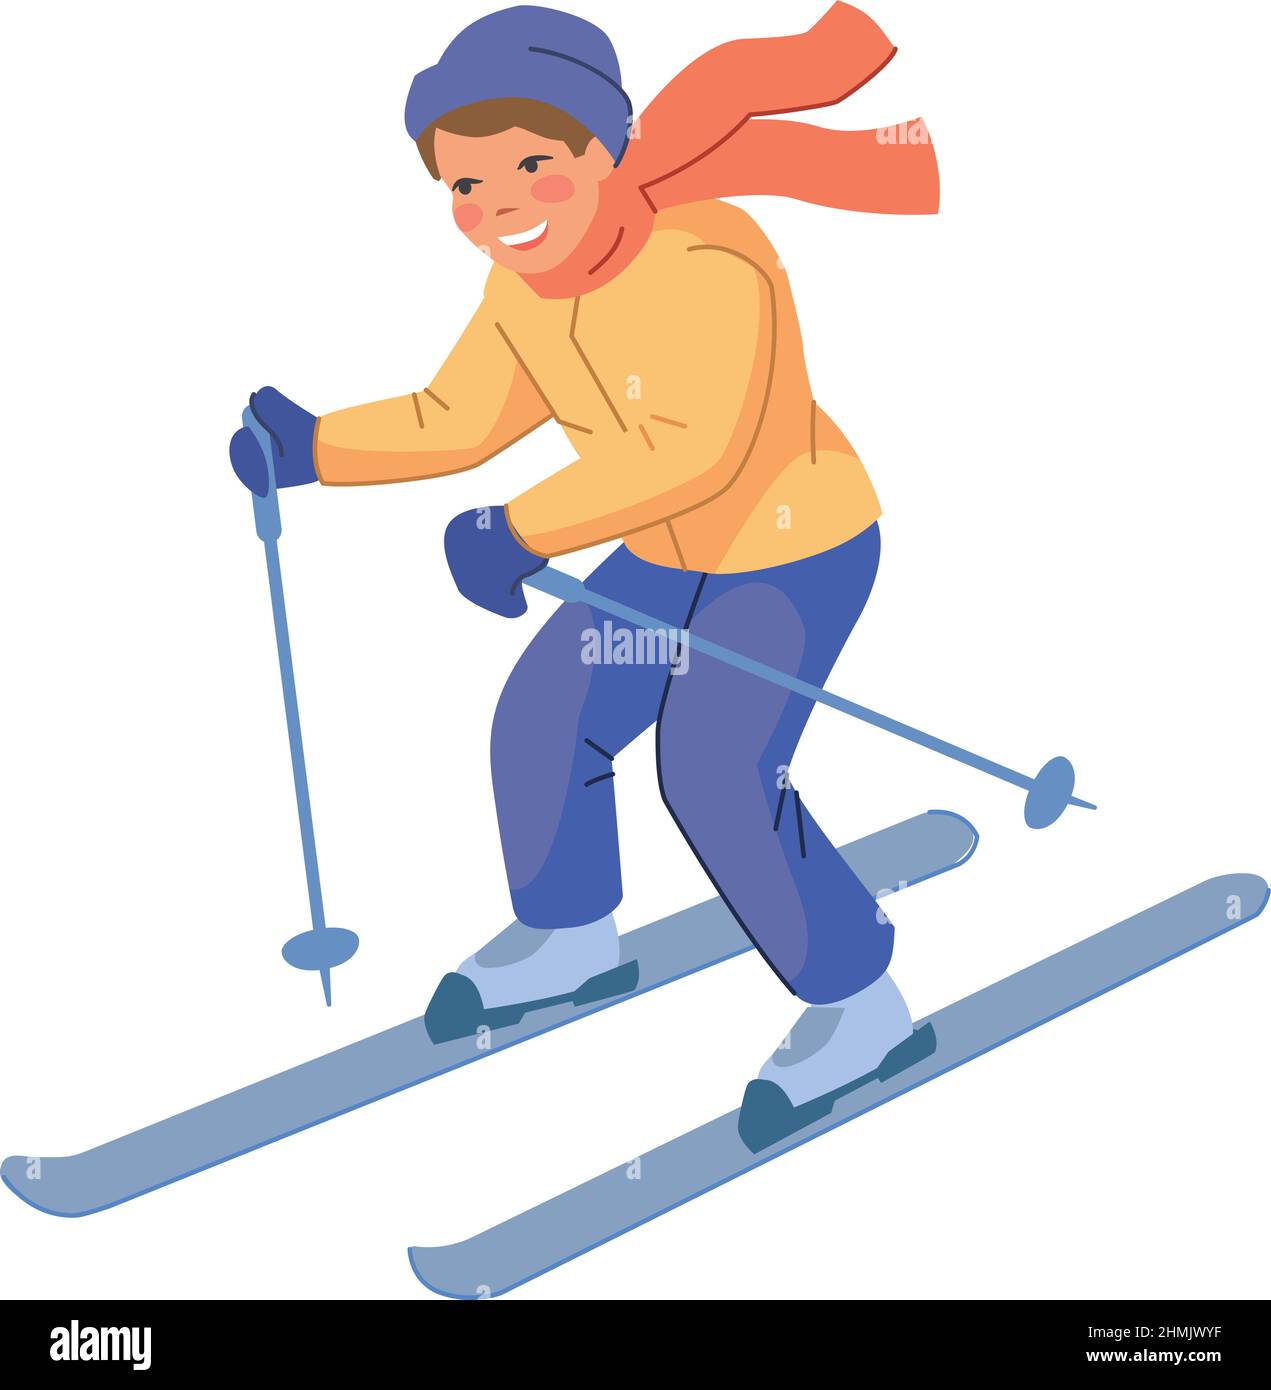 Kid skier in winter clothes. Happy smiling character isolated on white ...